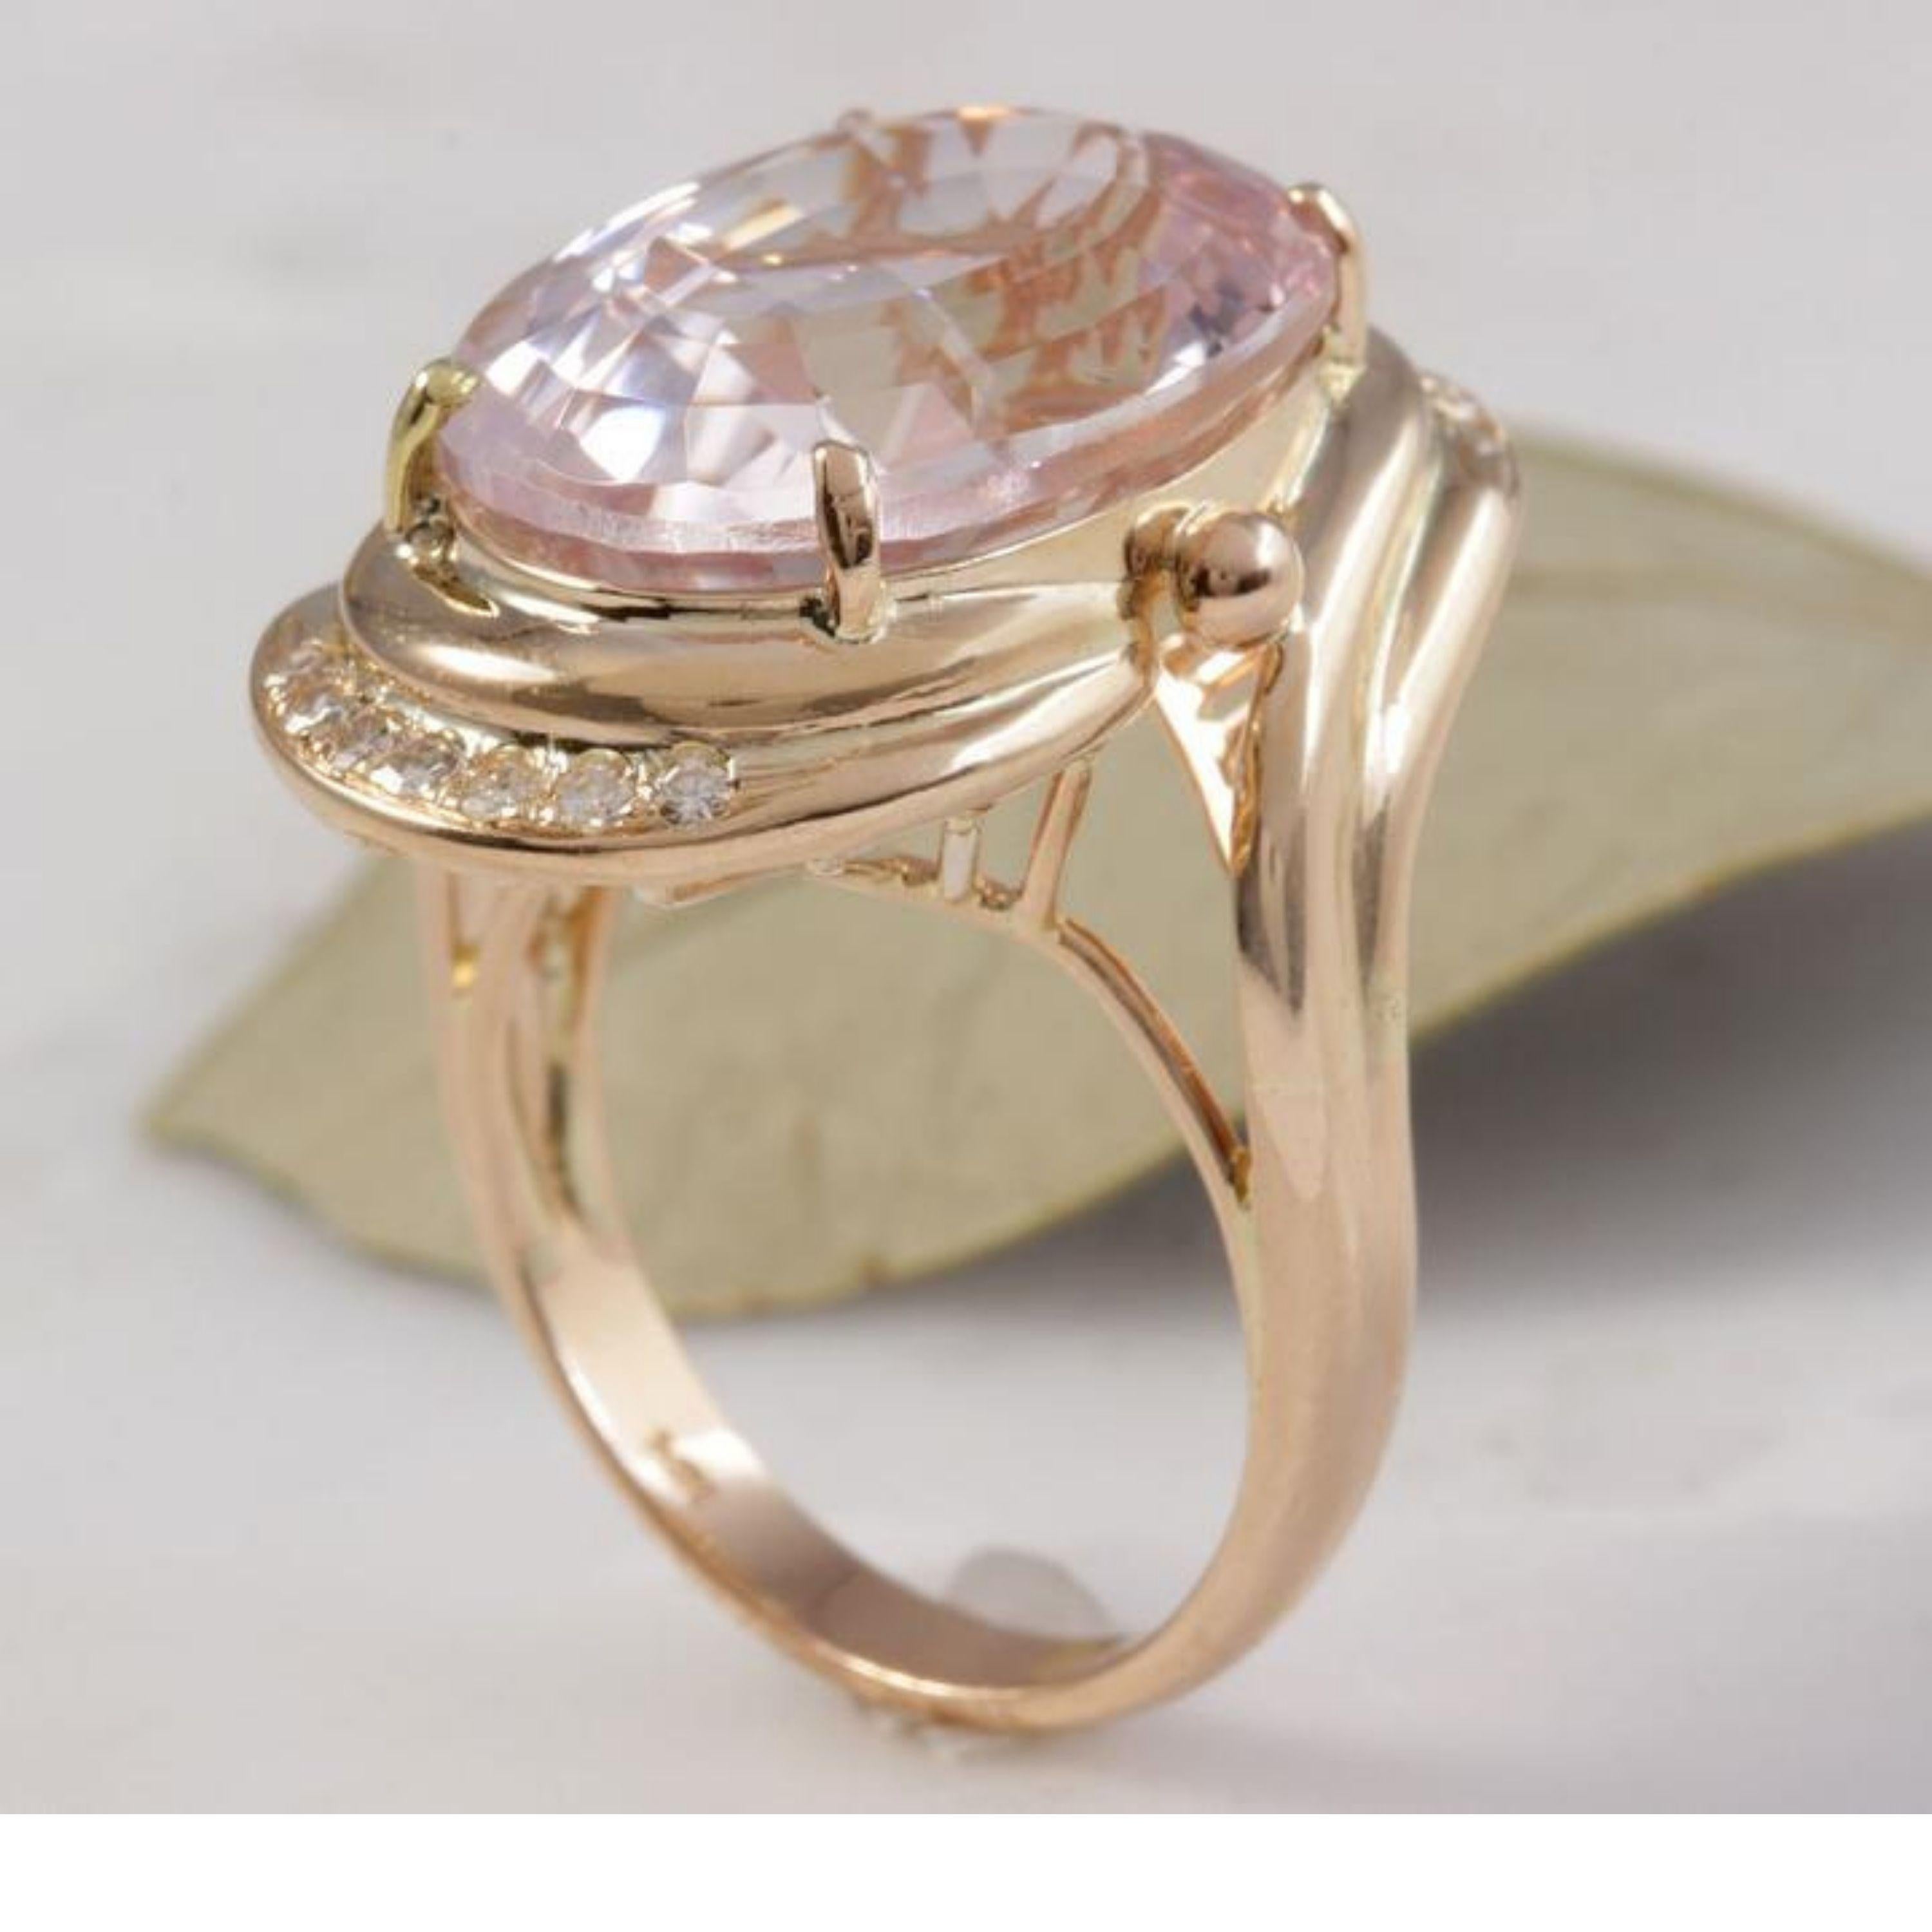 16.18 Carat Exquisite Natural Pink Kunzite and Diamond 14 Karat Solid Gold Ring For Sale 2